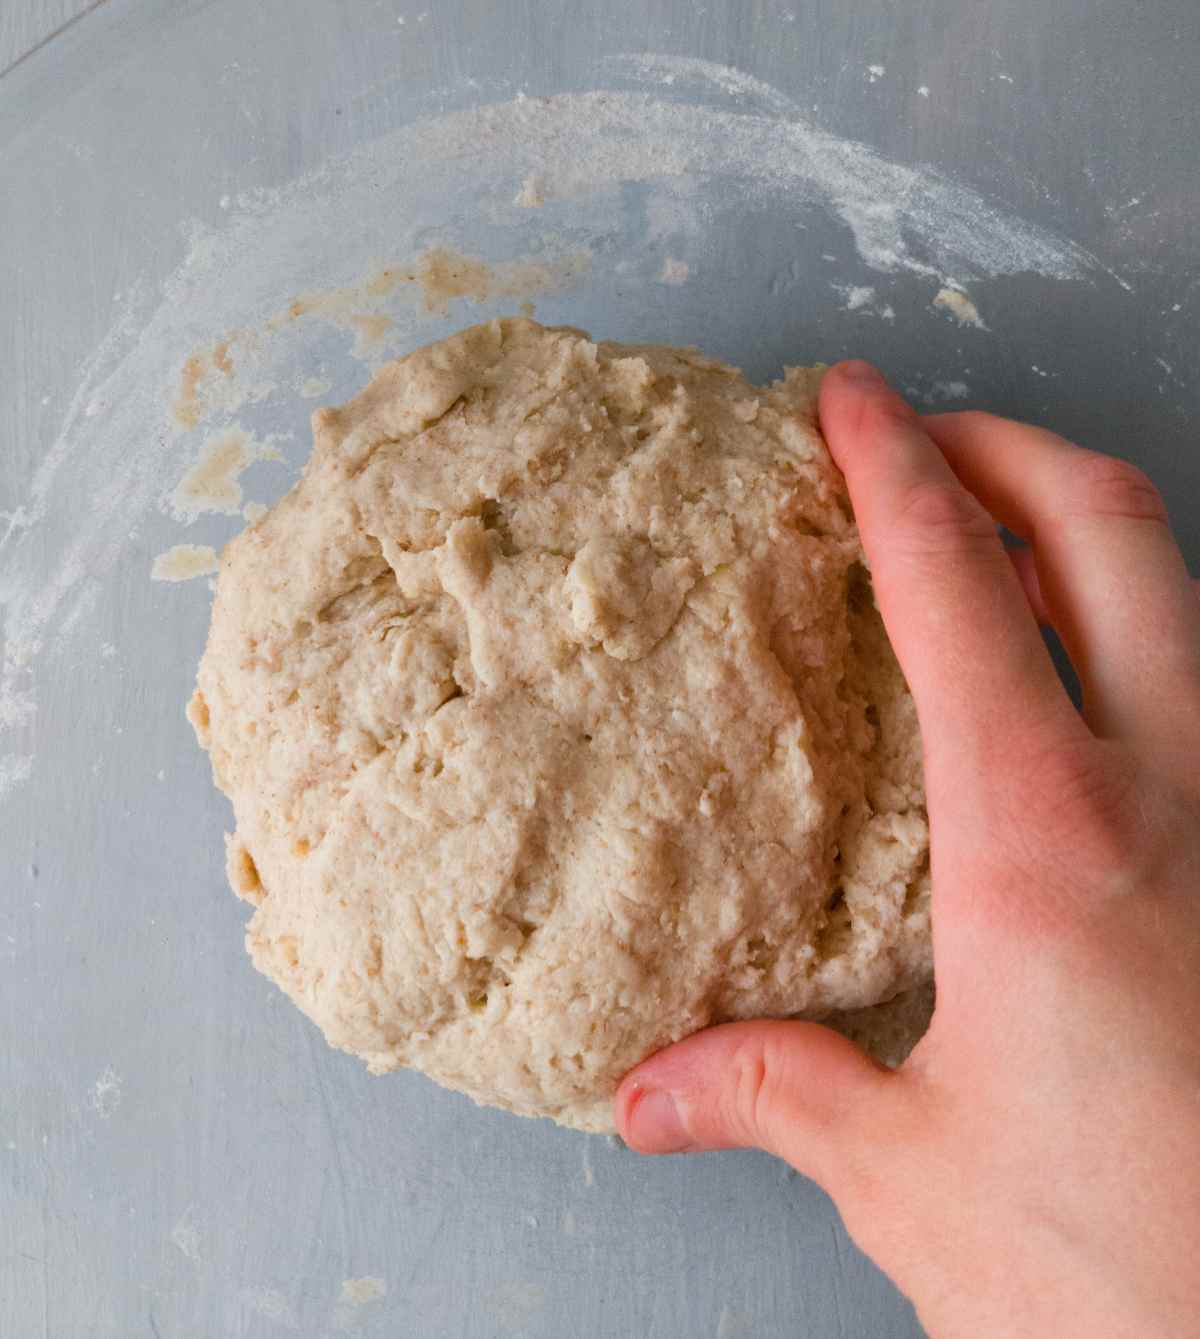 The dough shaped into a ball with a hand next to it.